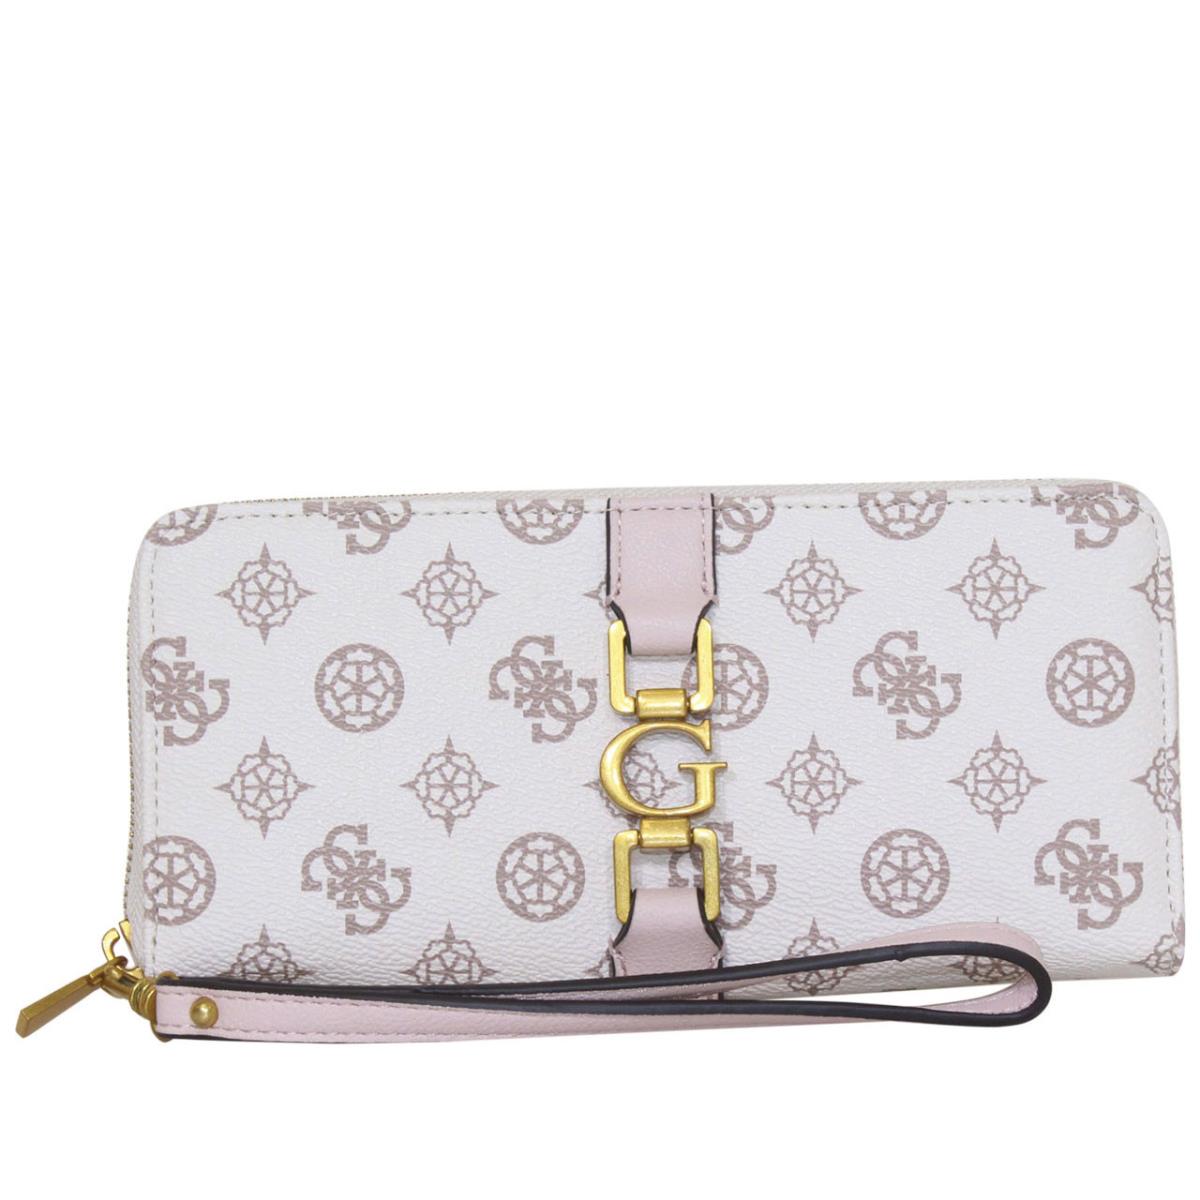 Guess Women`s Briana-slg Wallet Clutch Large Zip-around Wristlet Ivory